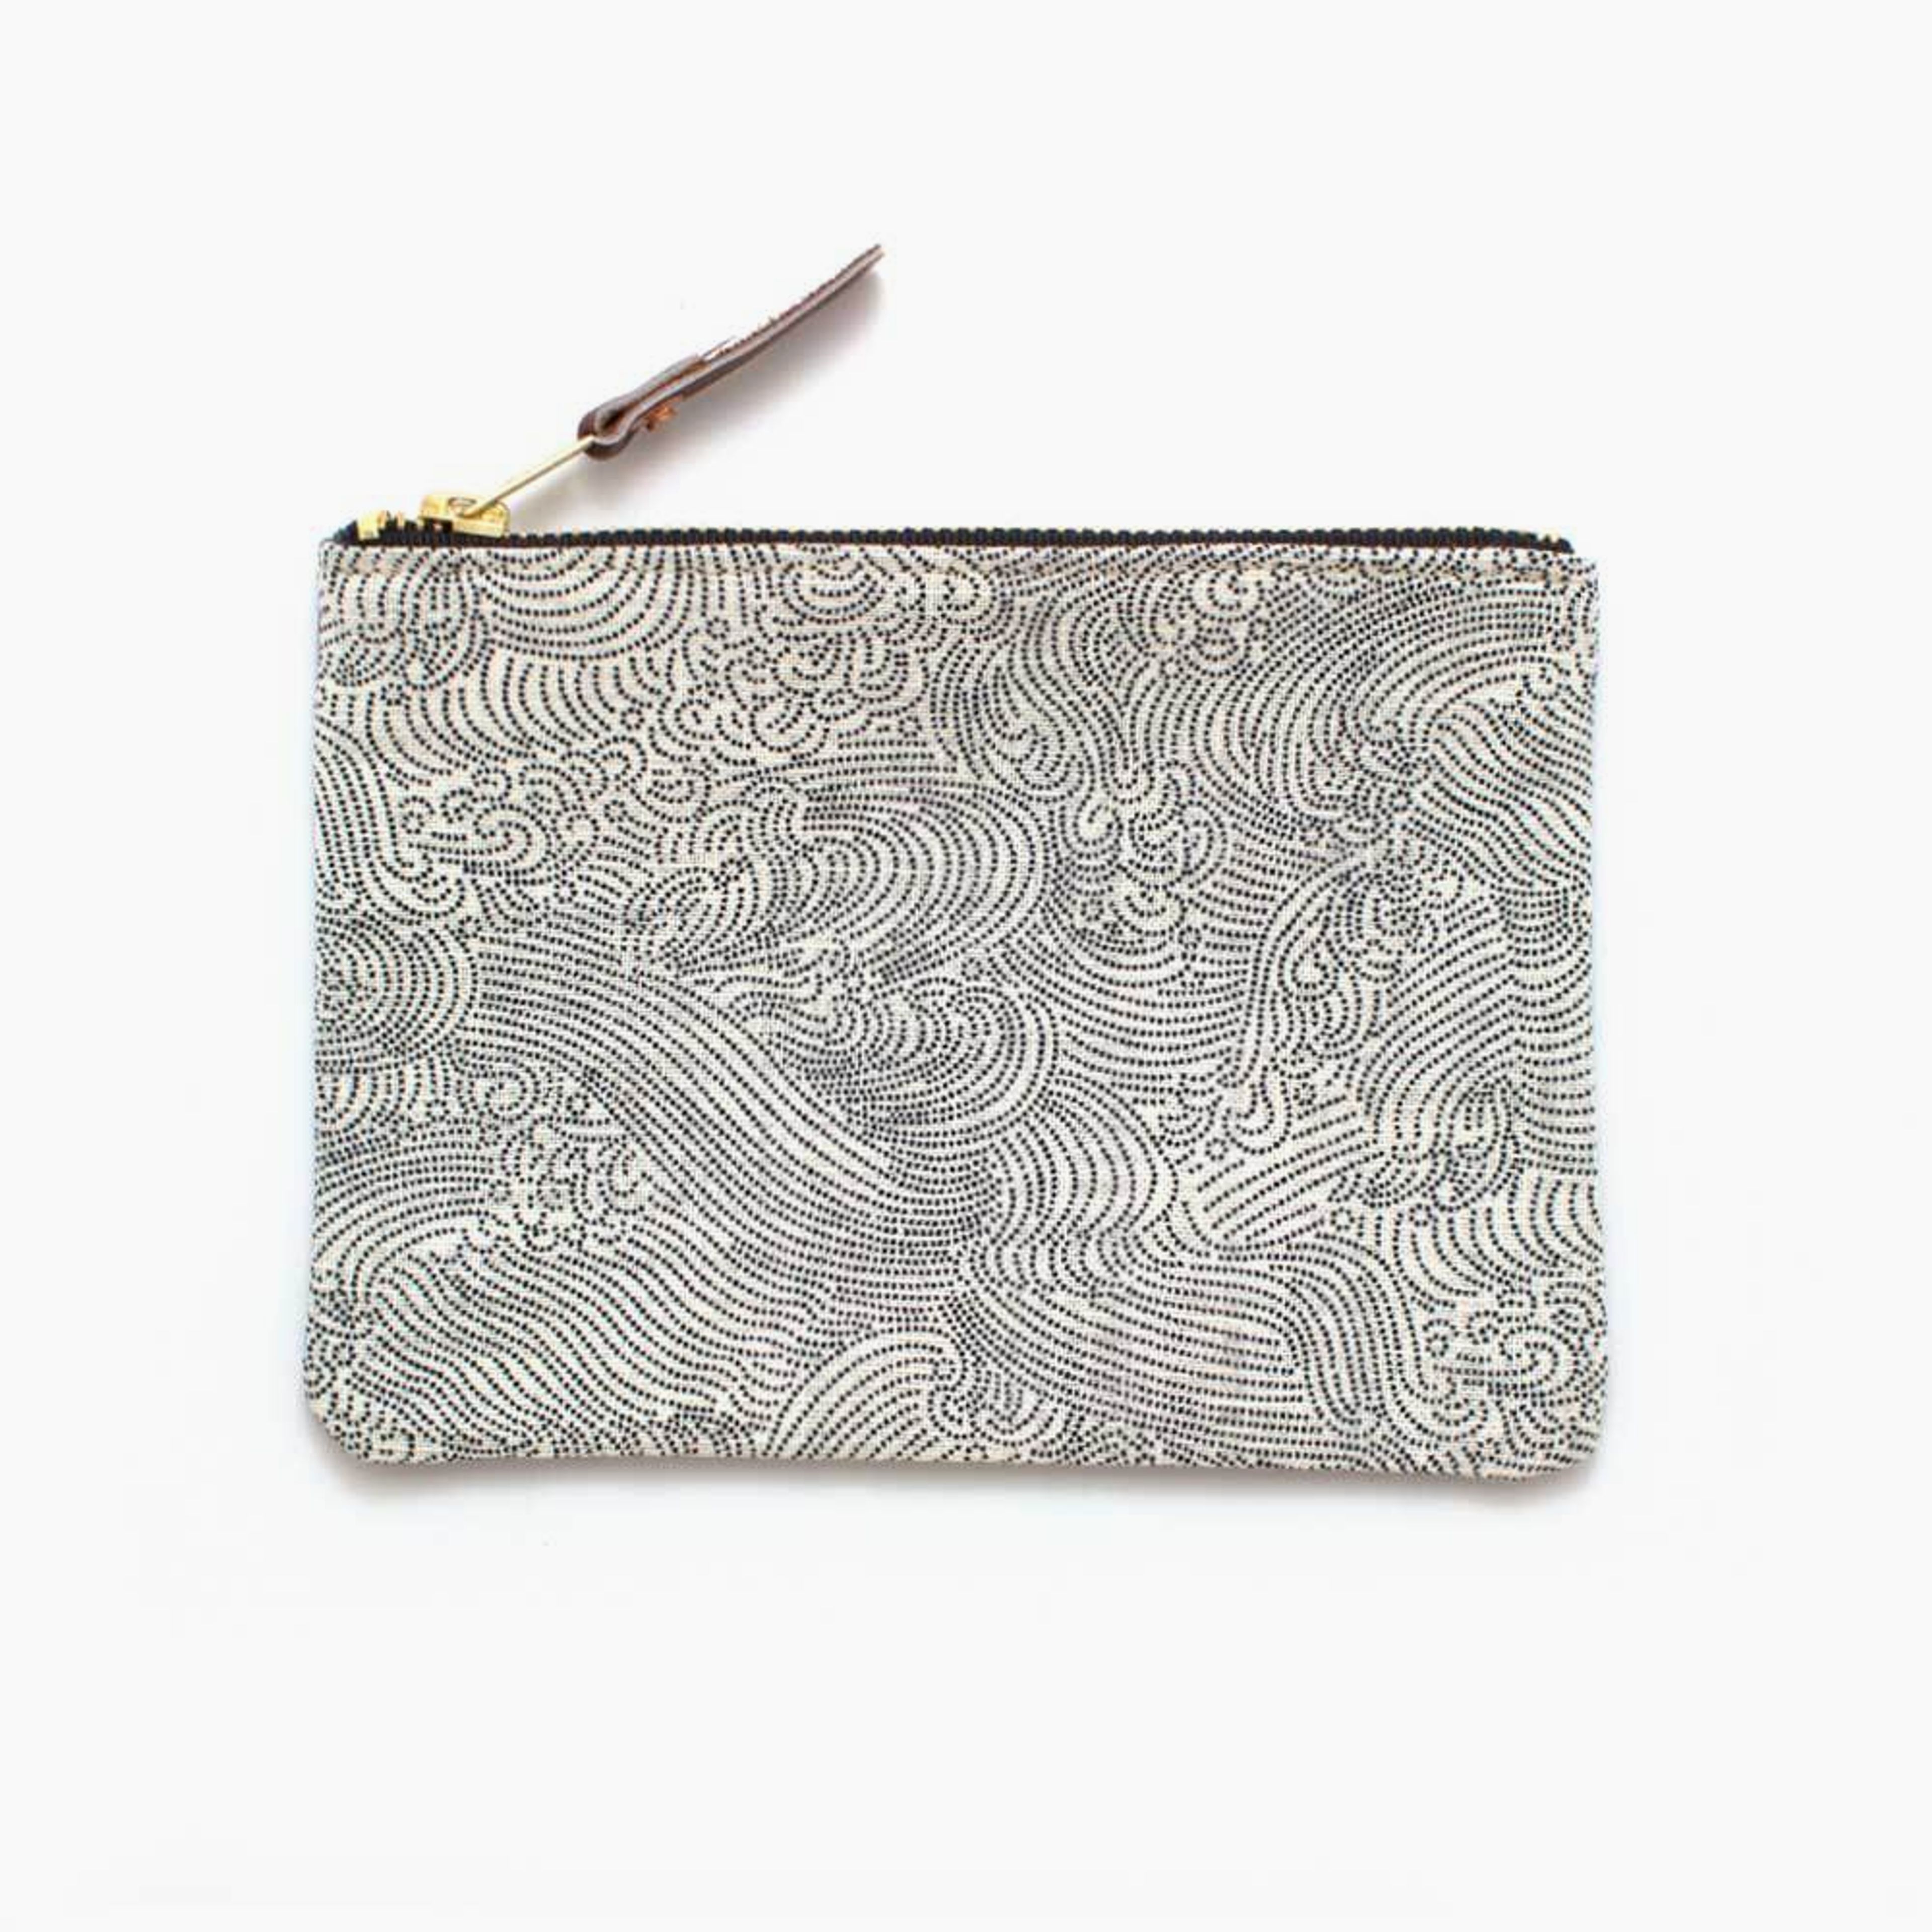 Japanese Ivory Tidal Wave Zipper Pouch